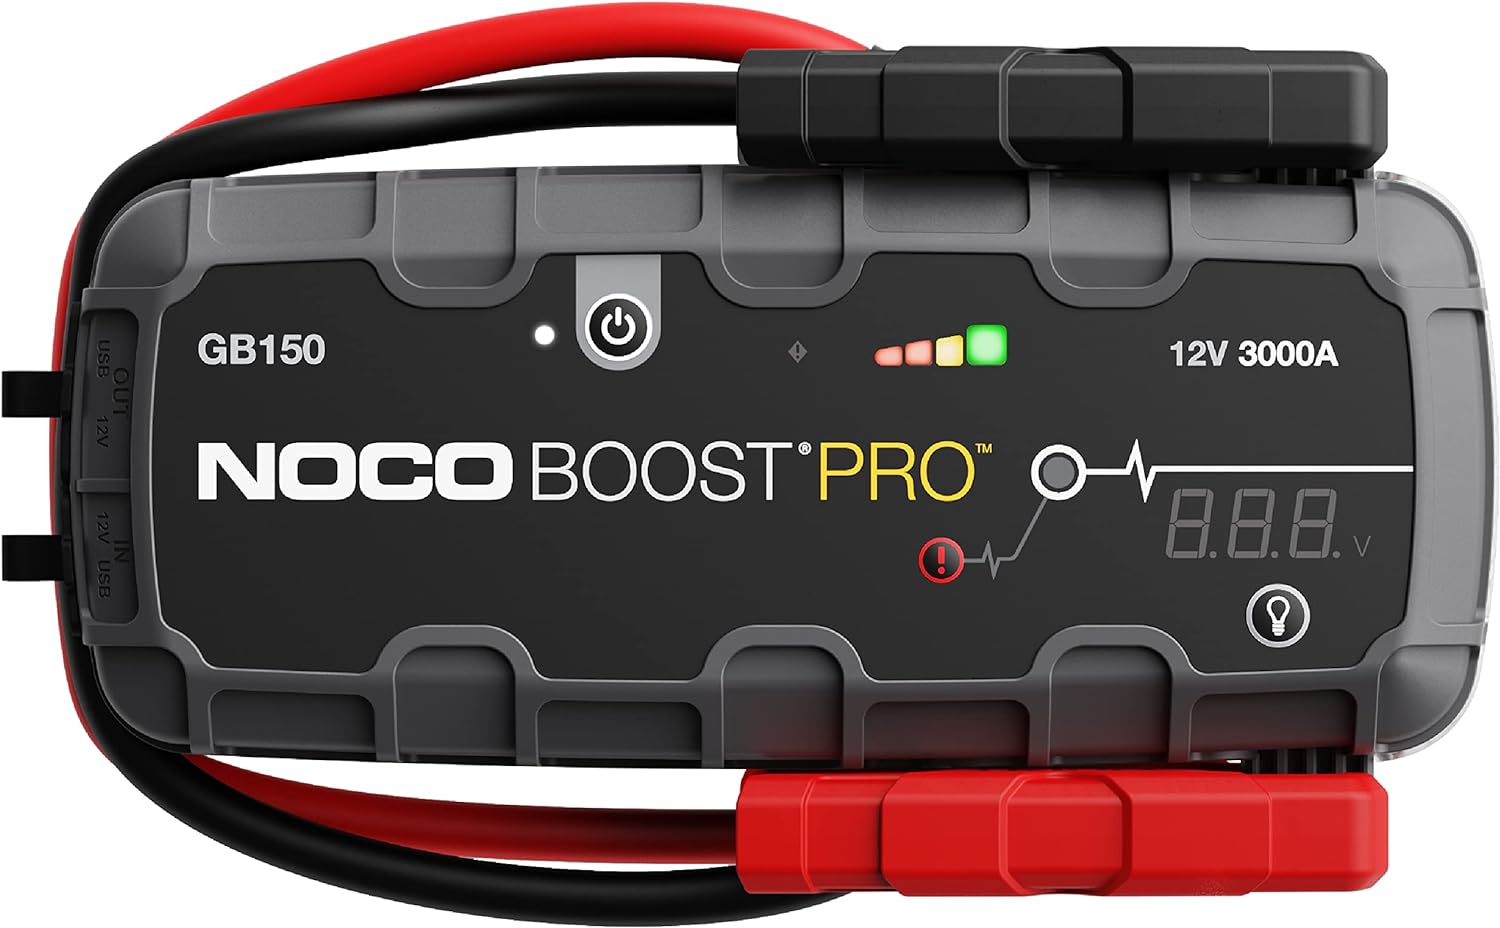 NOCO Boost Pro GB150 3000A UltraSafe Car Jump Starter, Jump Starter Power Pack, 12V Battery Booster, Portable Powerbank Charger, and Jump Leads for up to 9.0-Liter Petrol and 7.0-Liter Diesel Engines 5060